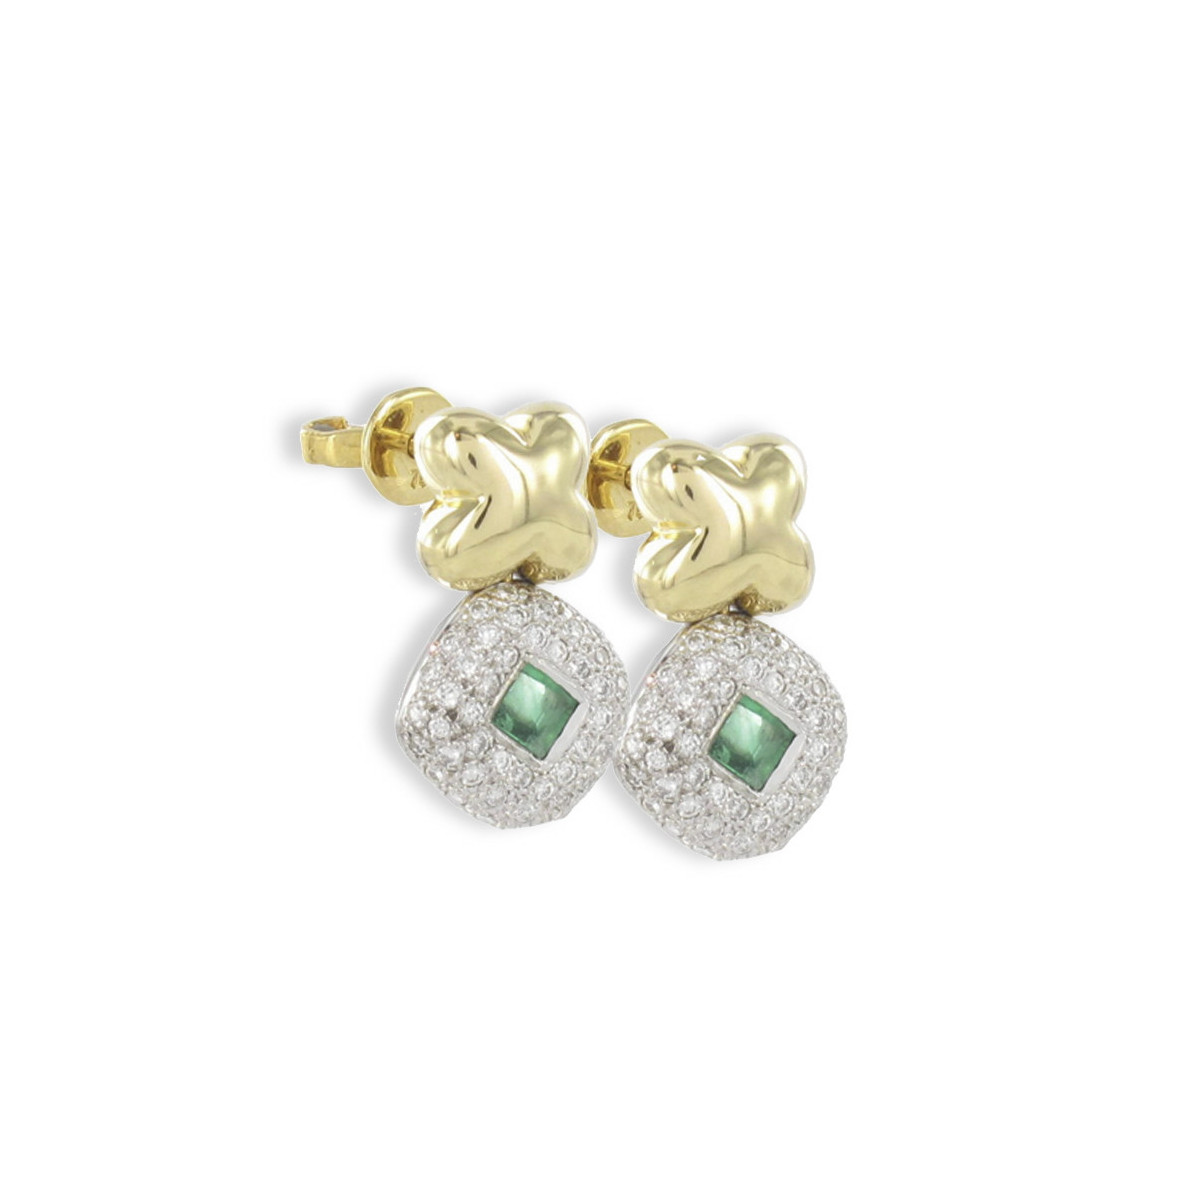 GOLD EMERALD AND DIAMOND EARRING